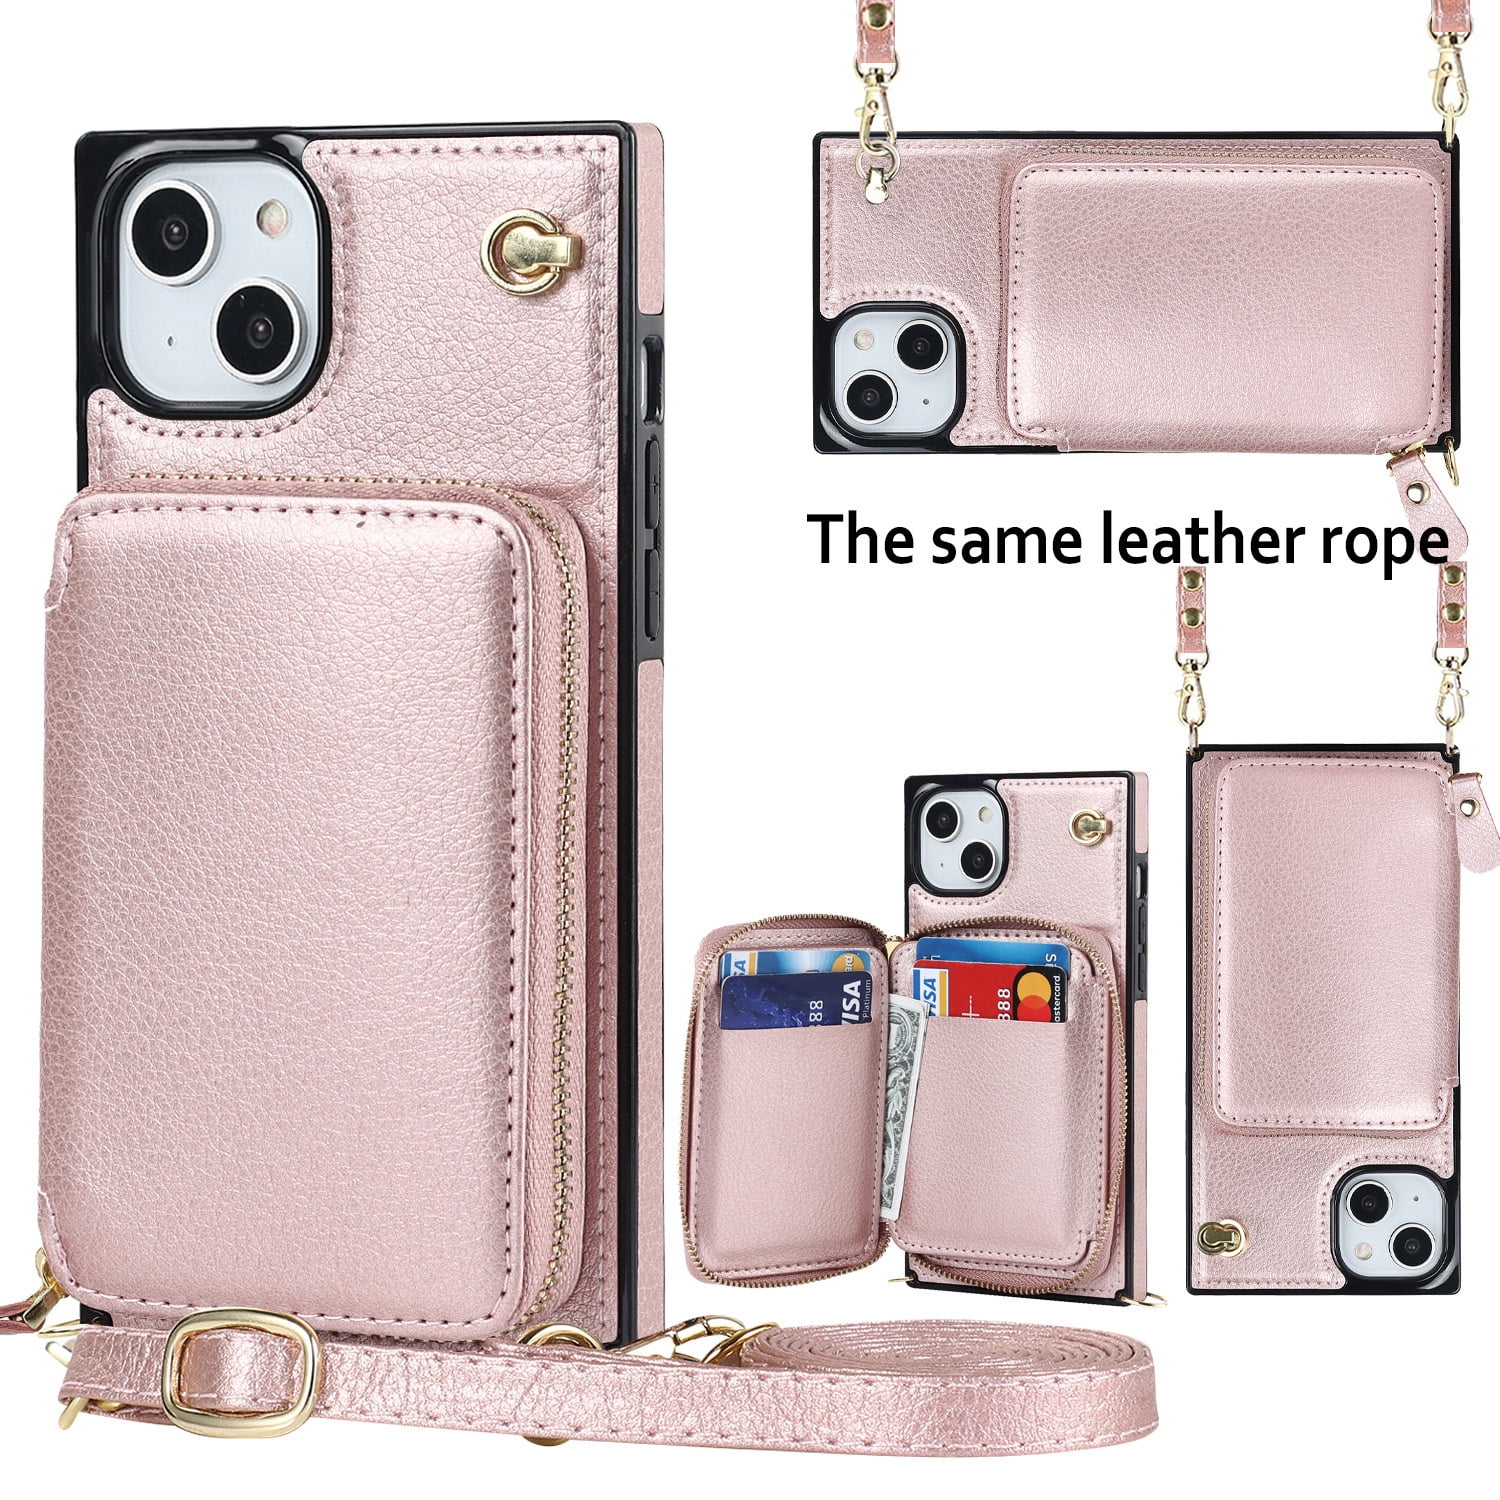 Genuine Pebbled Leather Zipper Pouch Add-On for Crossbody iPhone Case - Cream